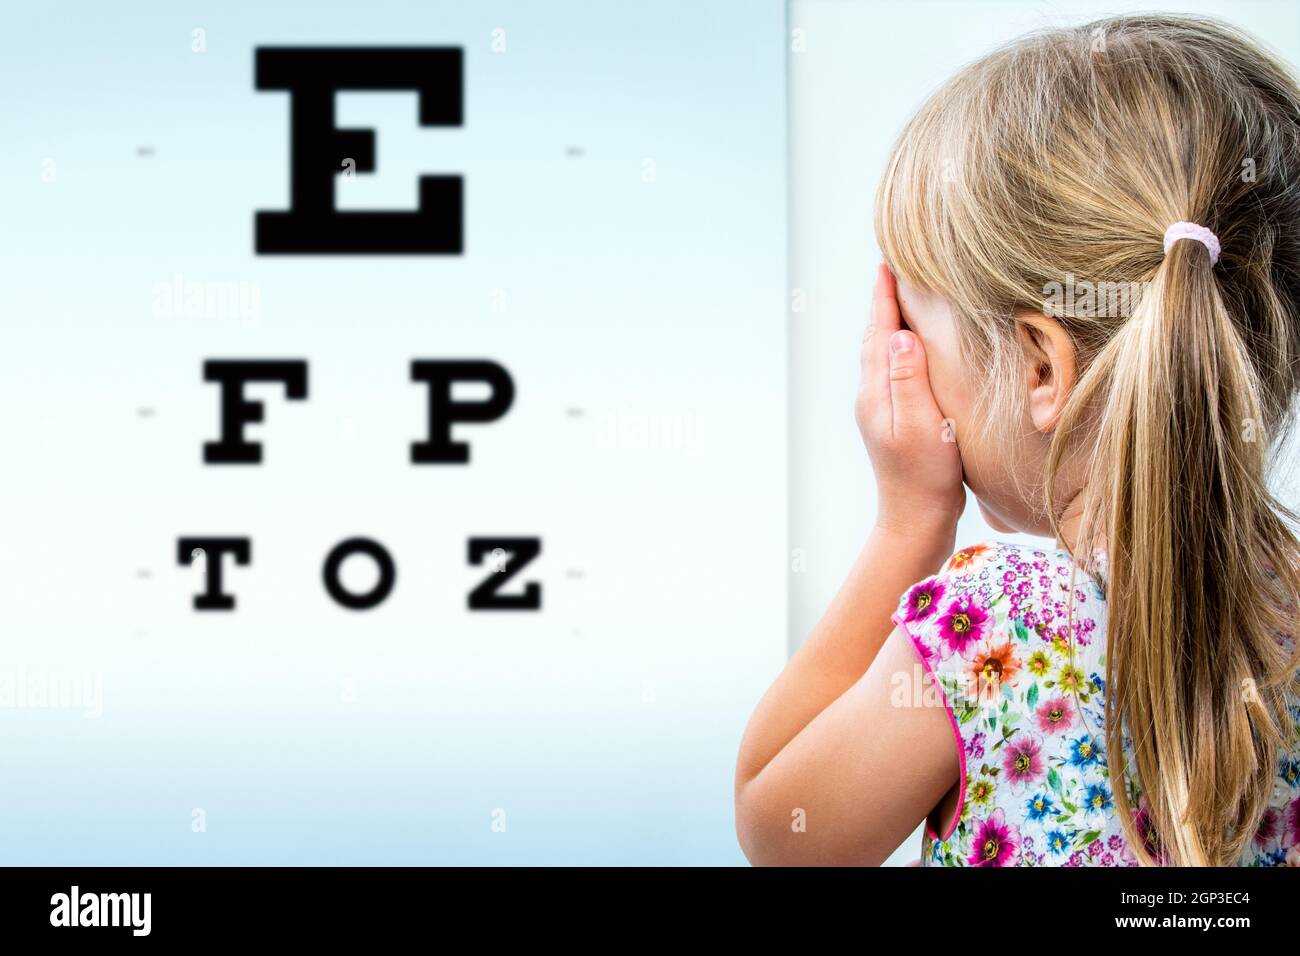 Close up rear view of girl testing eyesight. Infant closing one eye with hand looking at vision test chart. Stock Photo